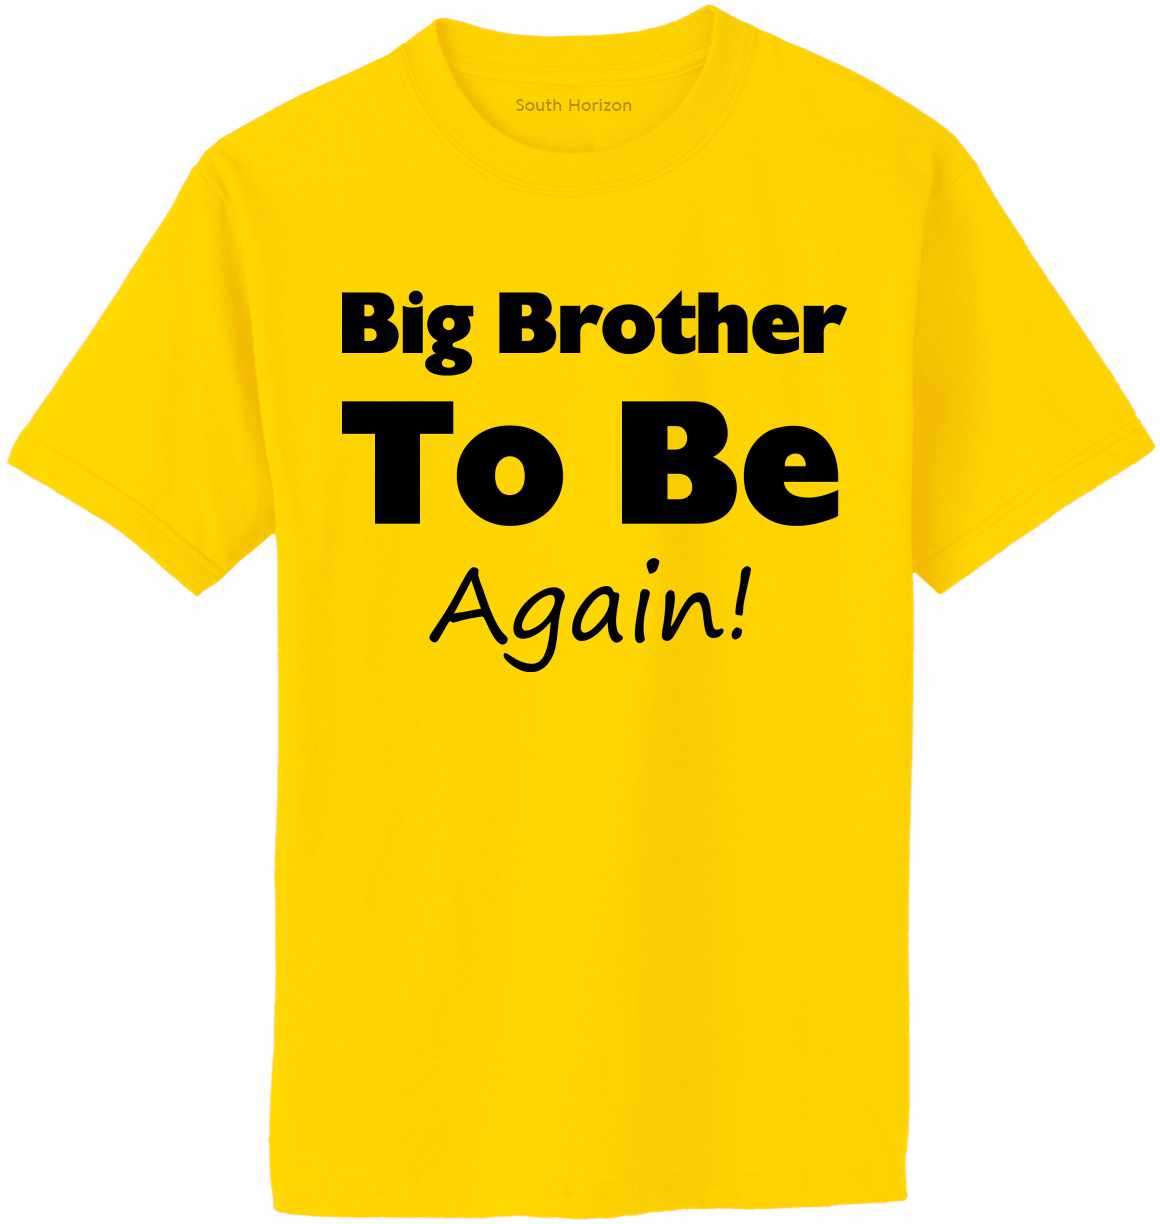 Big Brother To Be Again Adult T-Shirt (#864-1)